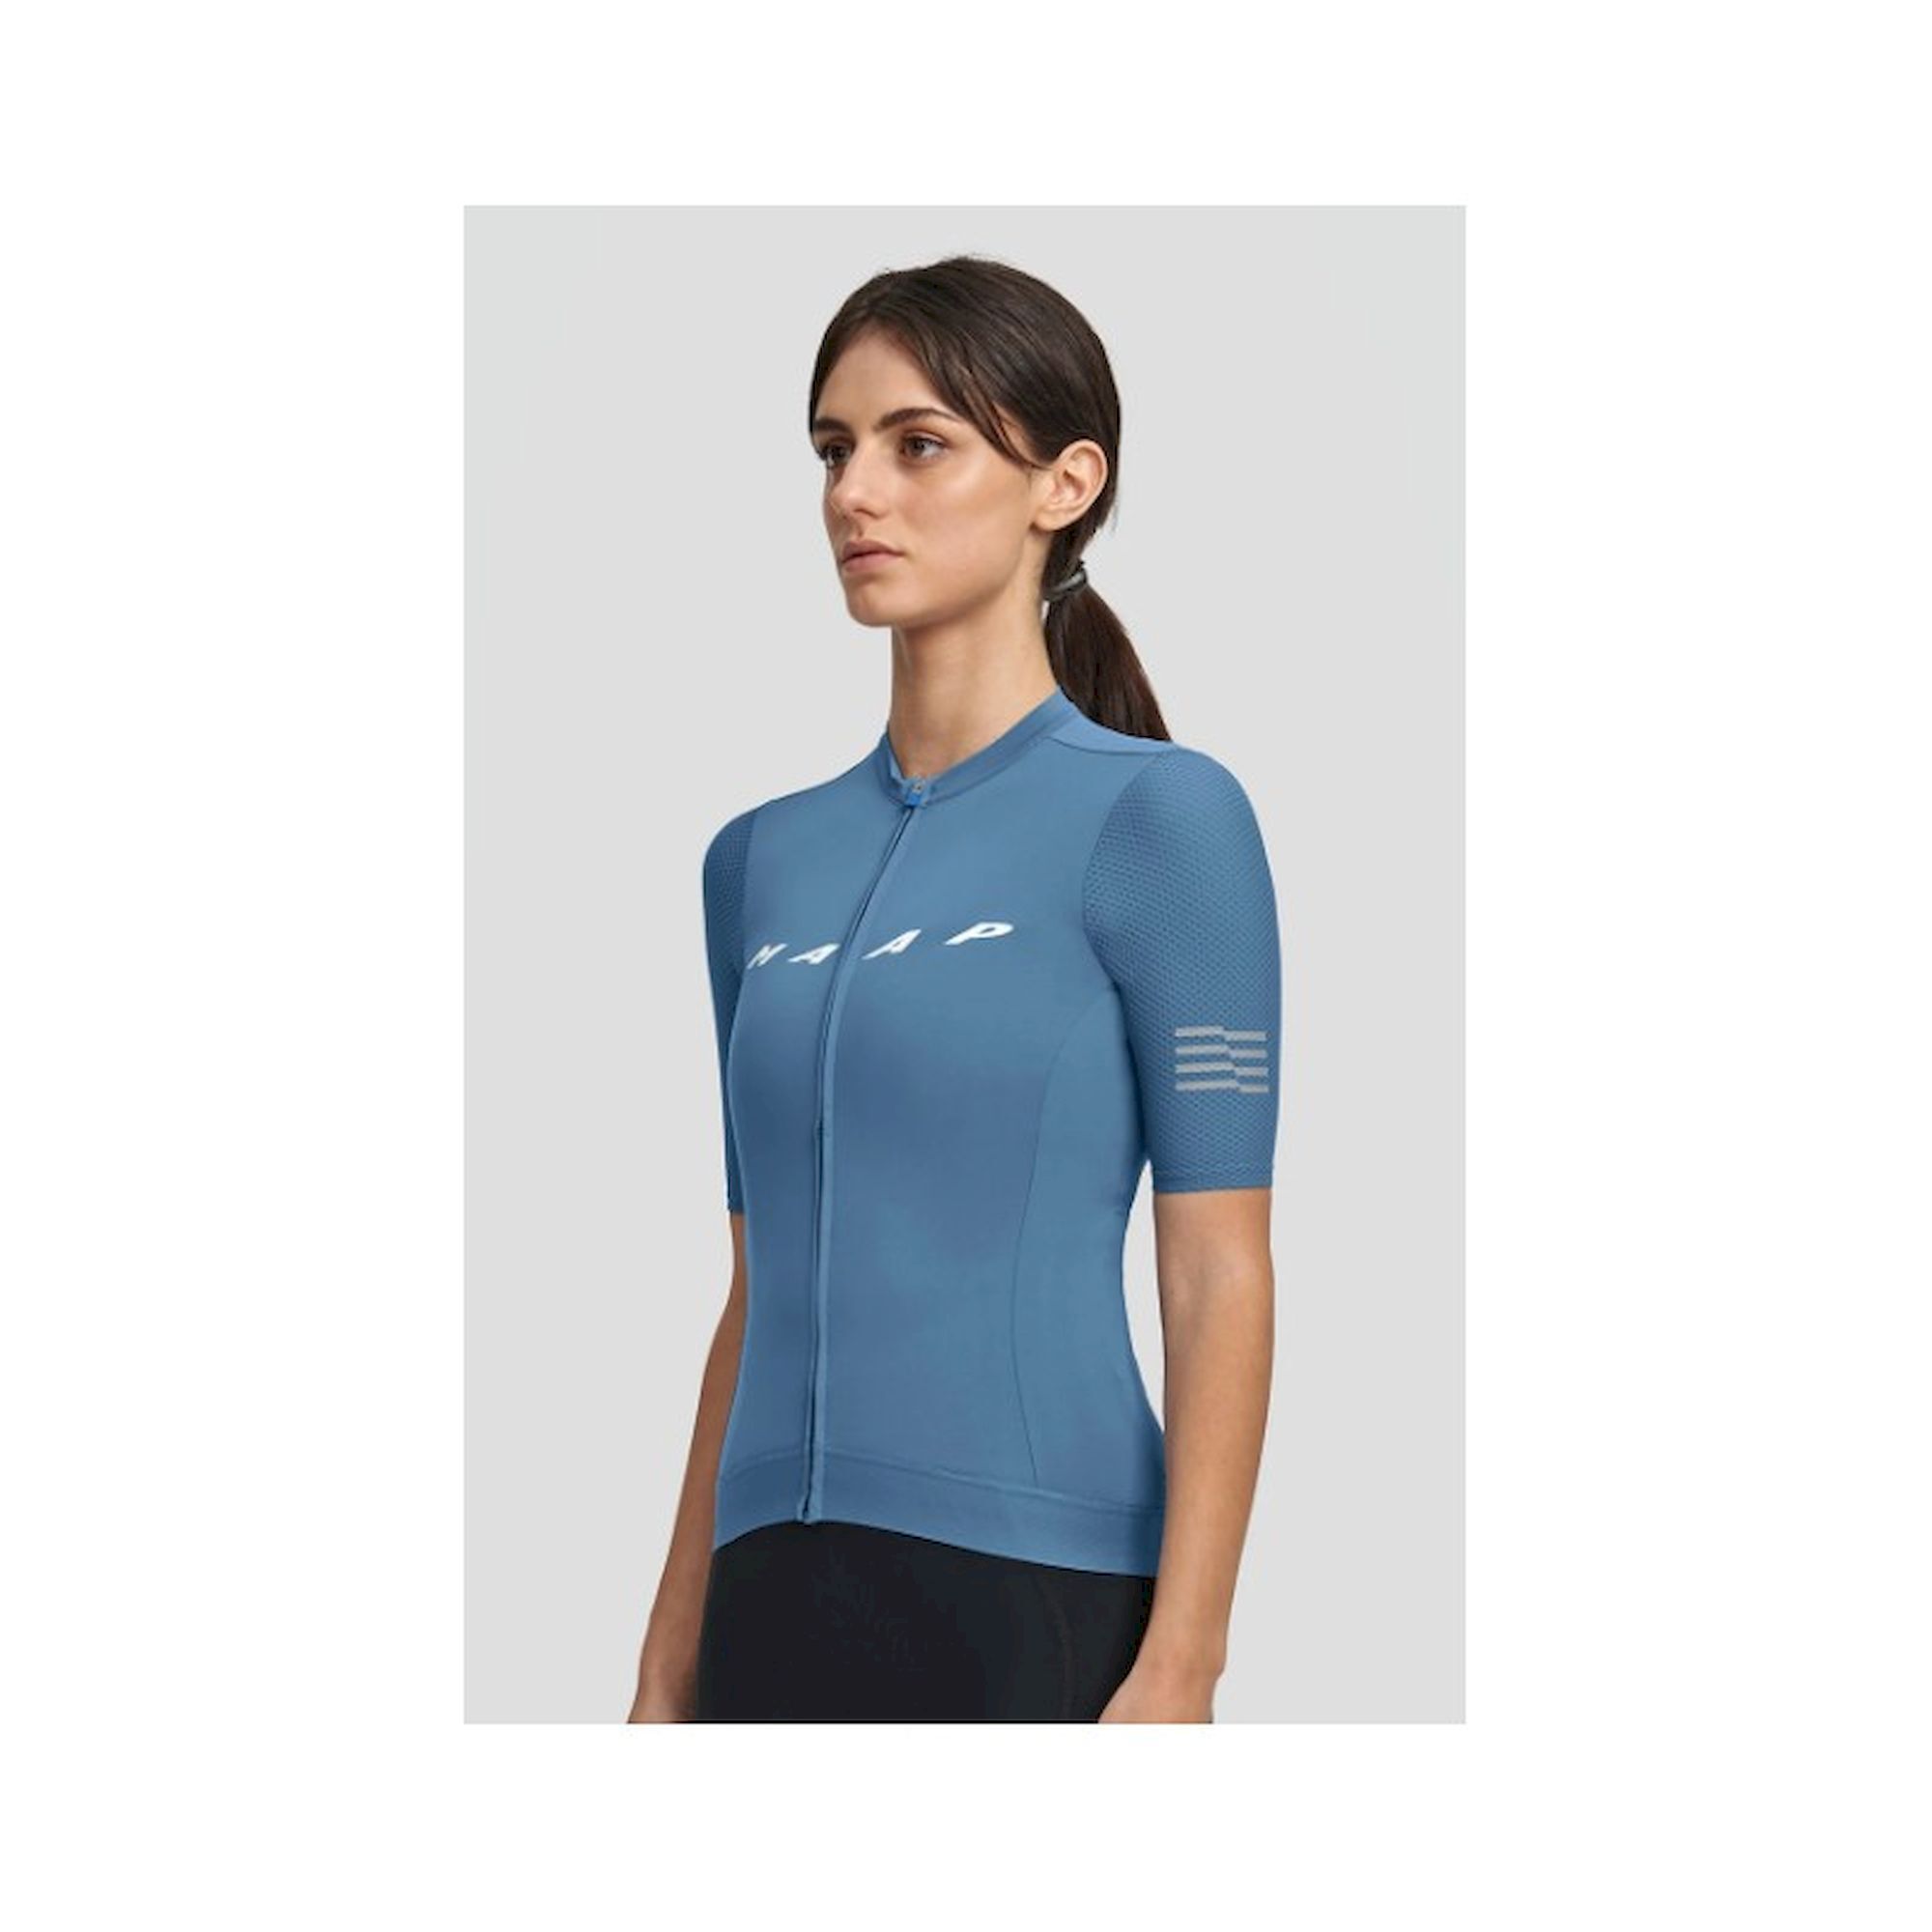 Maap Women's Evade Pro Base Jersey - Maglia ciclismo - Donna | Hardloop